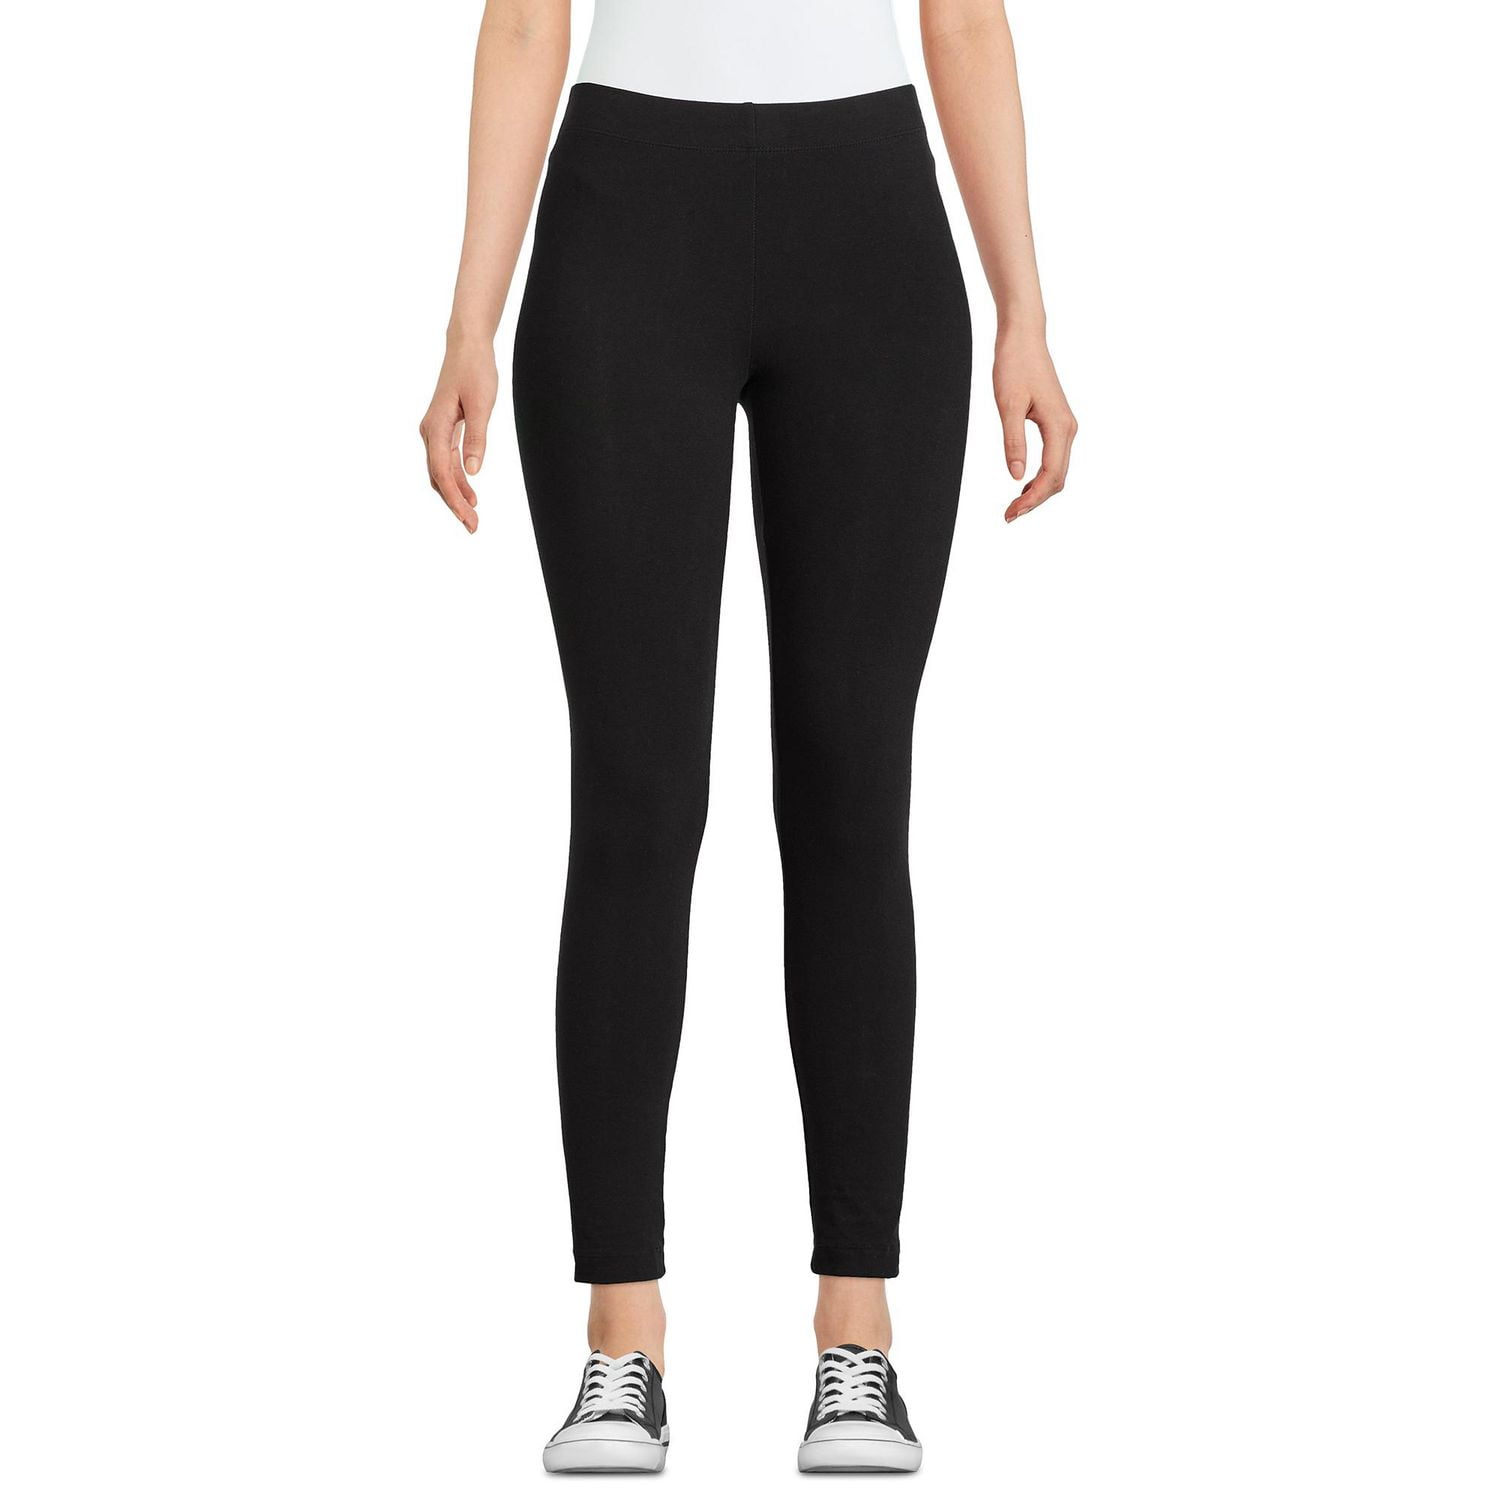 Enjoy the finest Women's Active Core Cotton Legging from